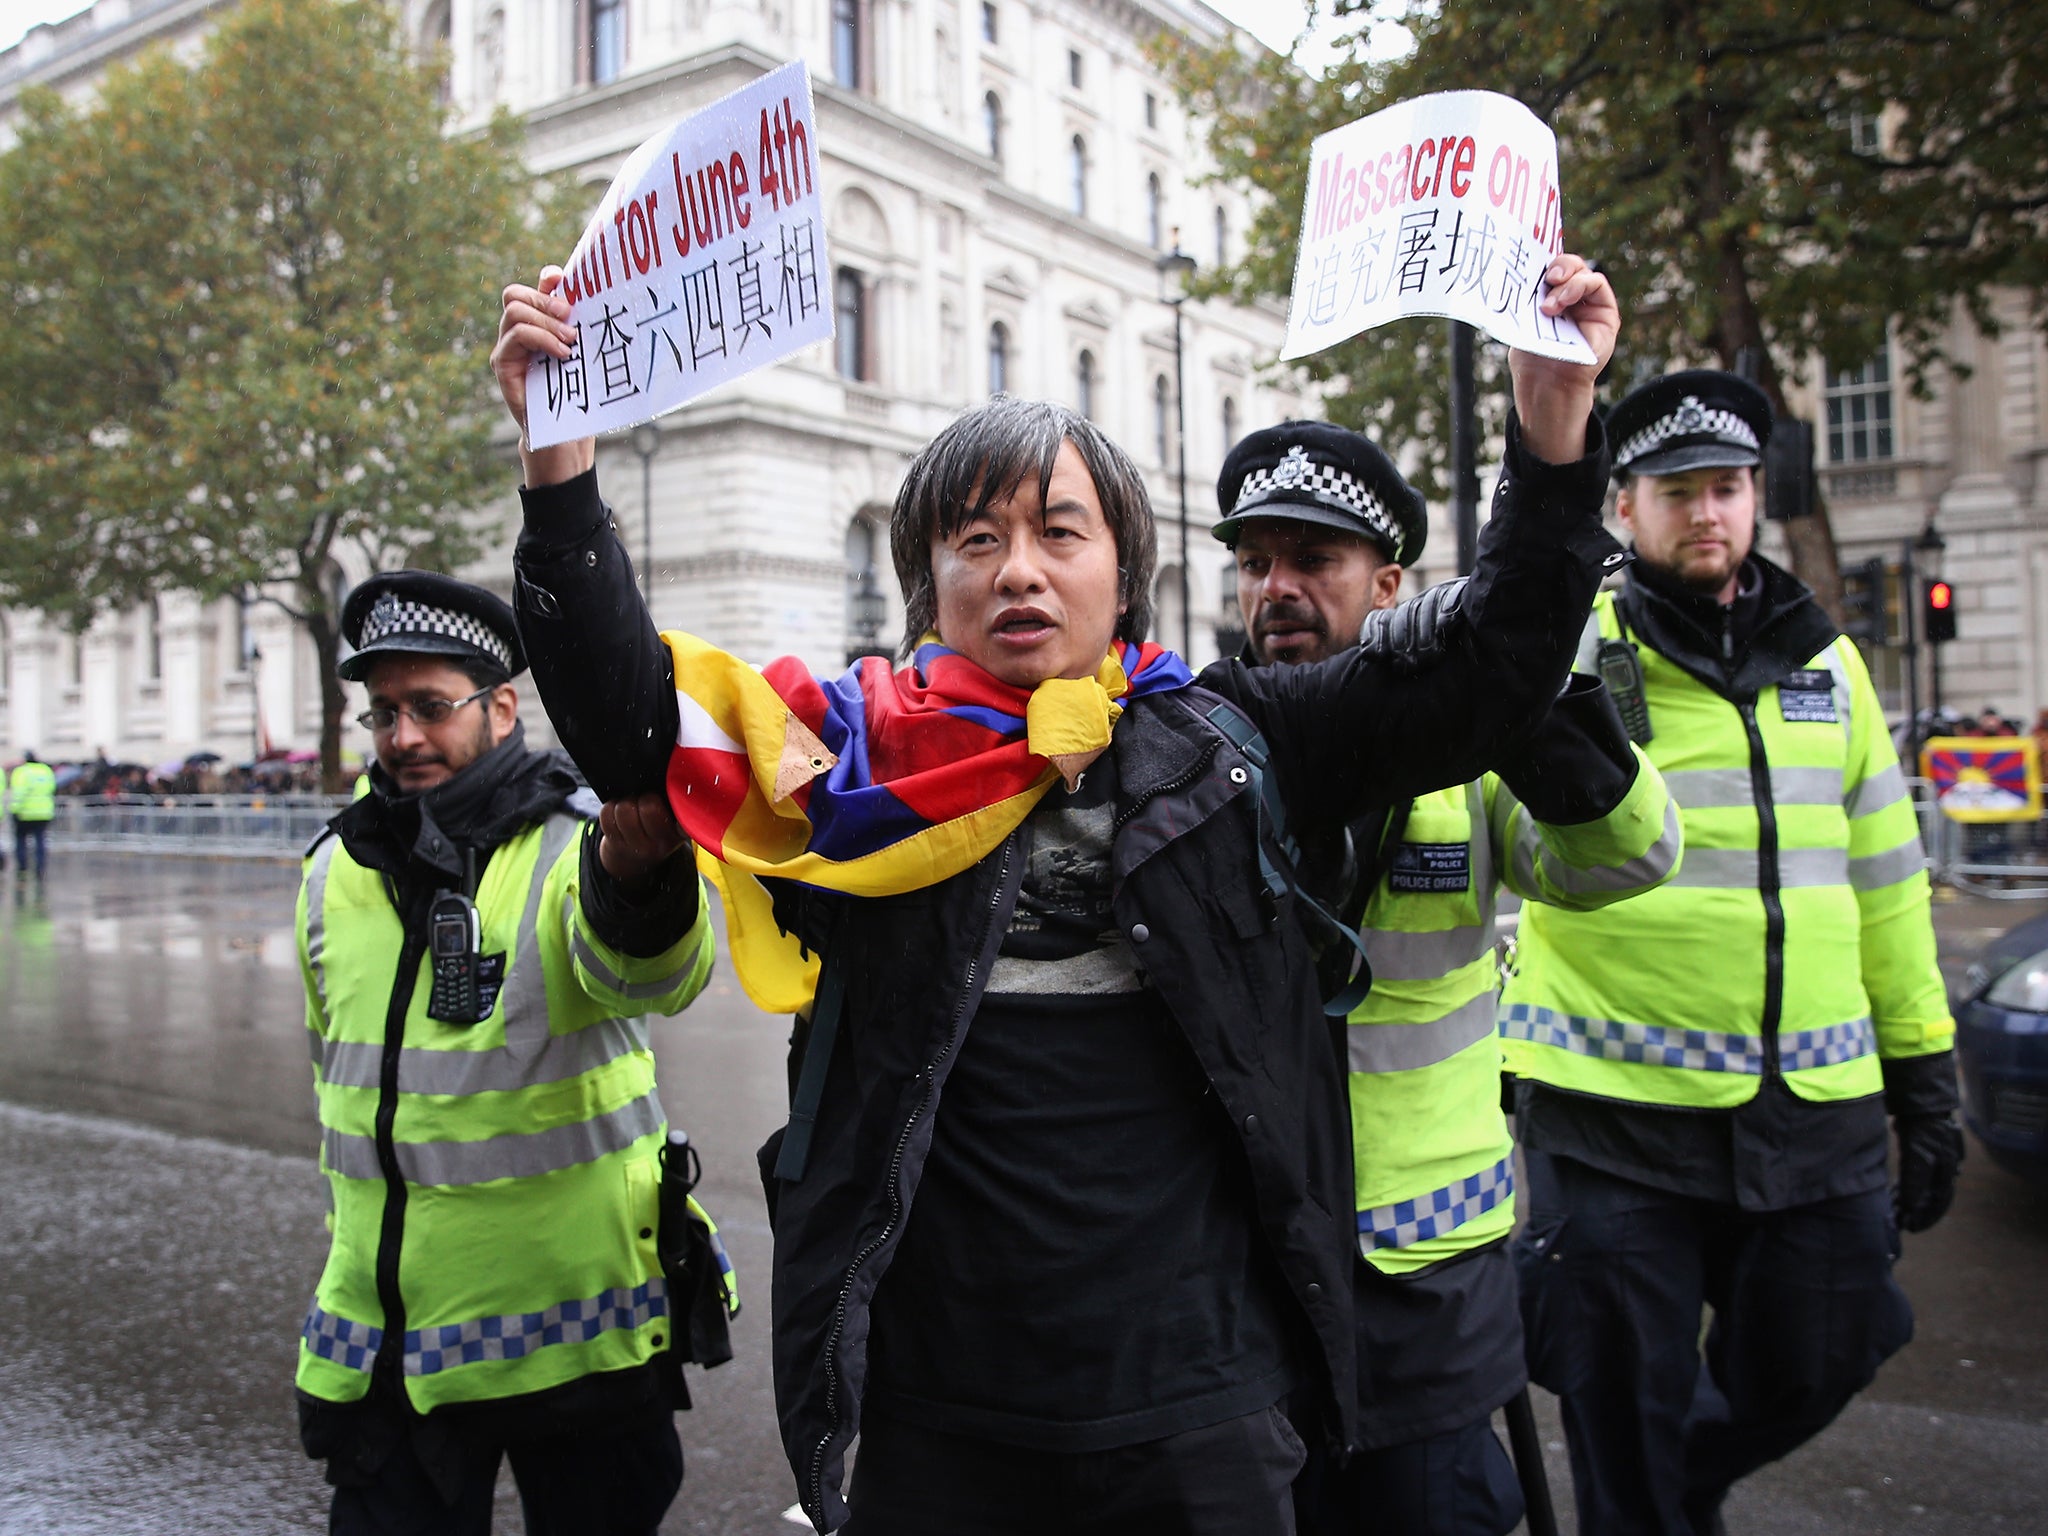 Shao Jiang protests outside Downing Street on Wednesday ahead of the arrival of Chinese President Xi Jinping